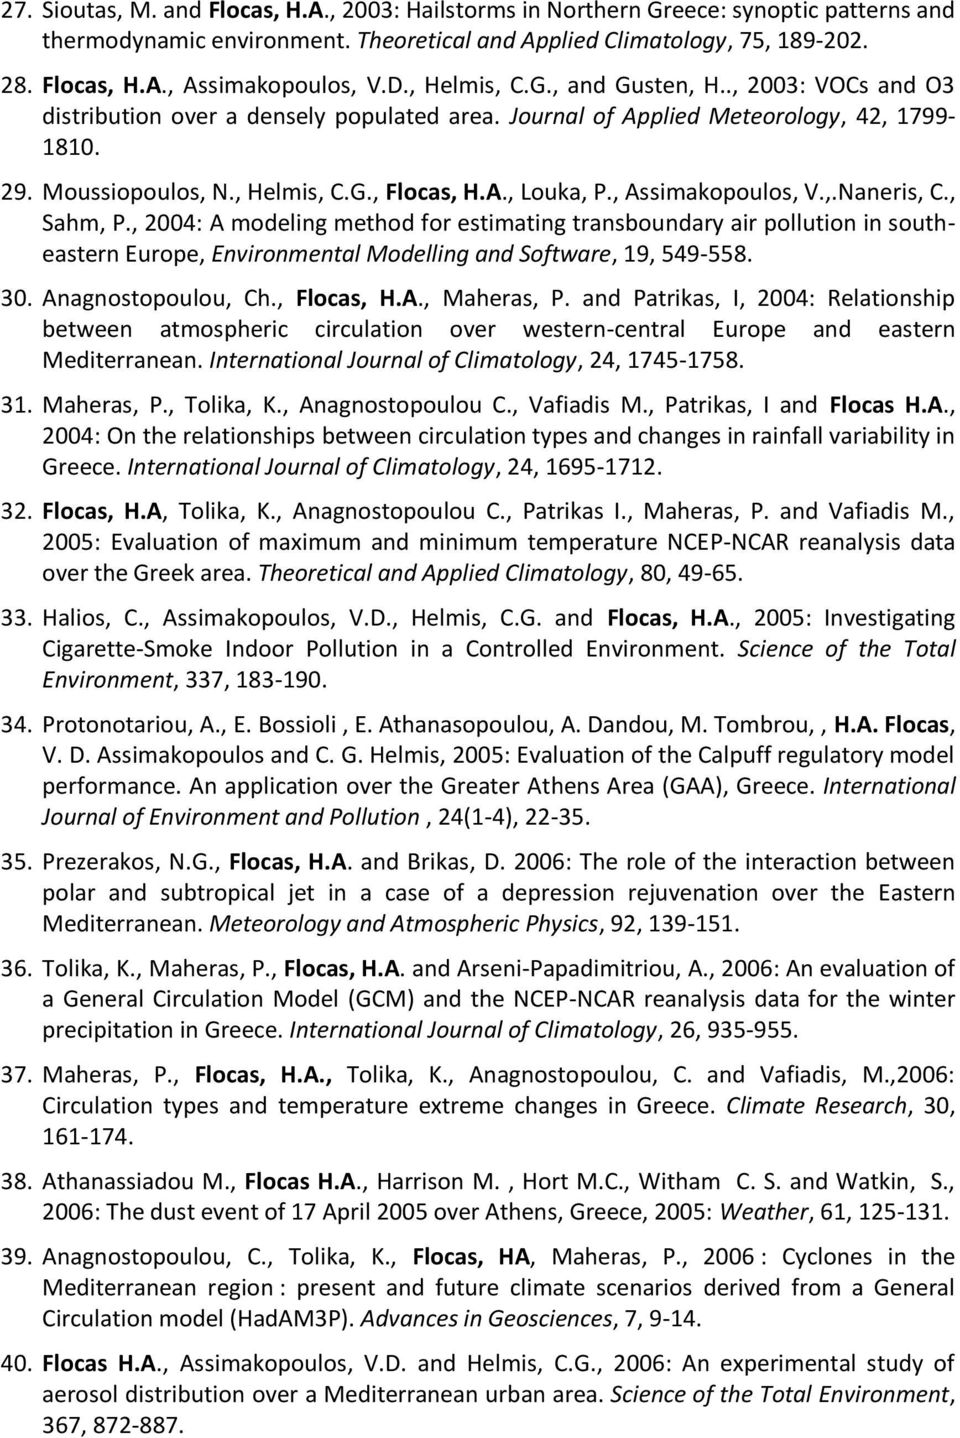 , Assimakopoulos, V.,.Naneris, C., Sahm, P., 2004: A modeling method for estimating transboundary air pollution in southeastern Europe, Environmental Modelling and Software, 19, 549-558. 30.